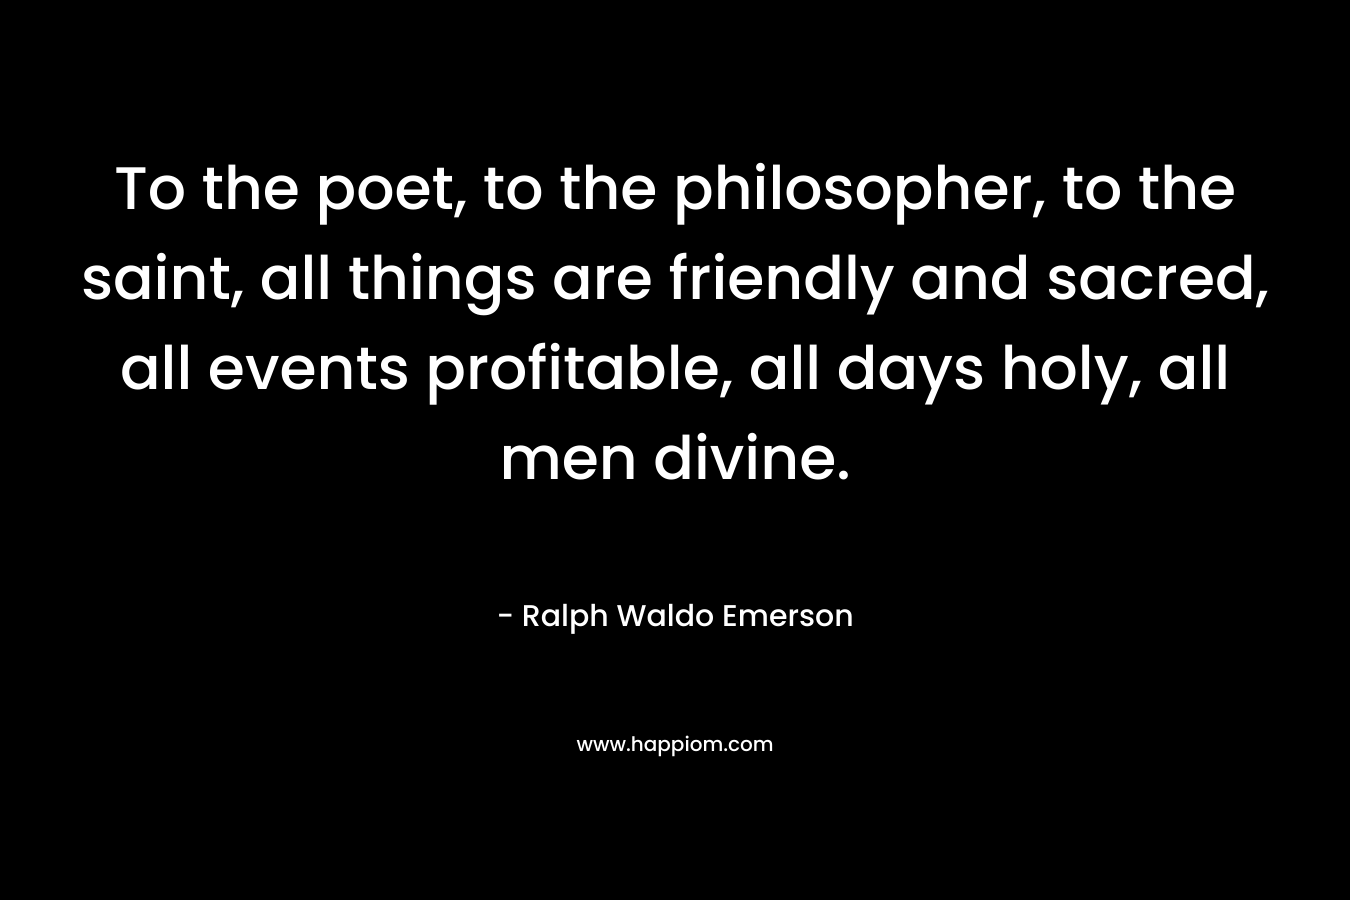 To the poet, to the philosopher, to the saint, all things are friendly and sacred, all events profitable, all days holy, all men divine. – Ralph Waldo Emerson